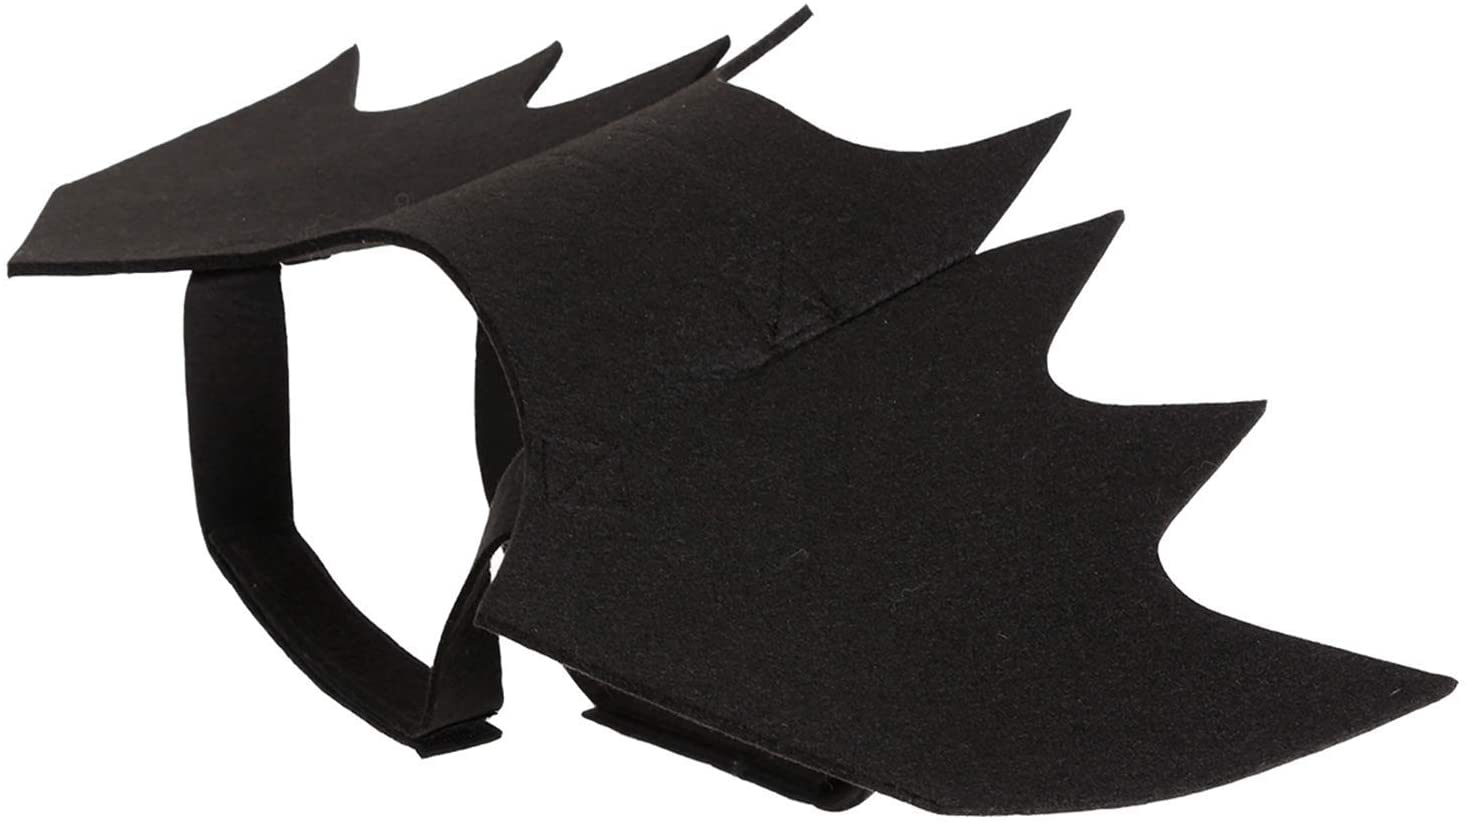 Rypet Dog Bat Costume - Halloween Pet Costume Bat Wings Cosplay Dog Costume Cat Costume for Party